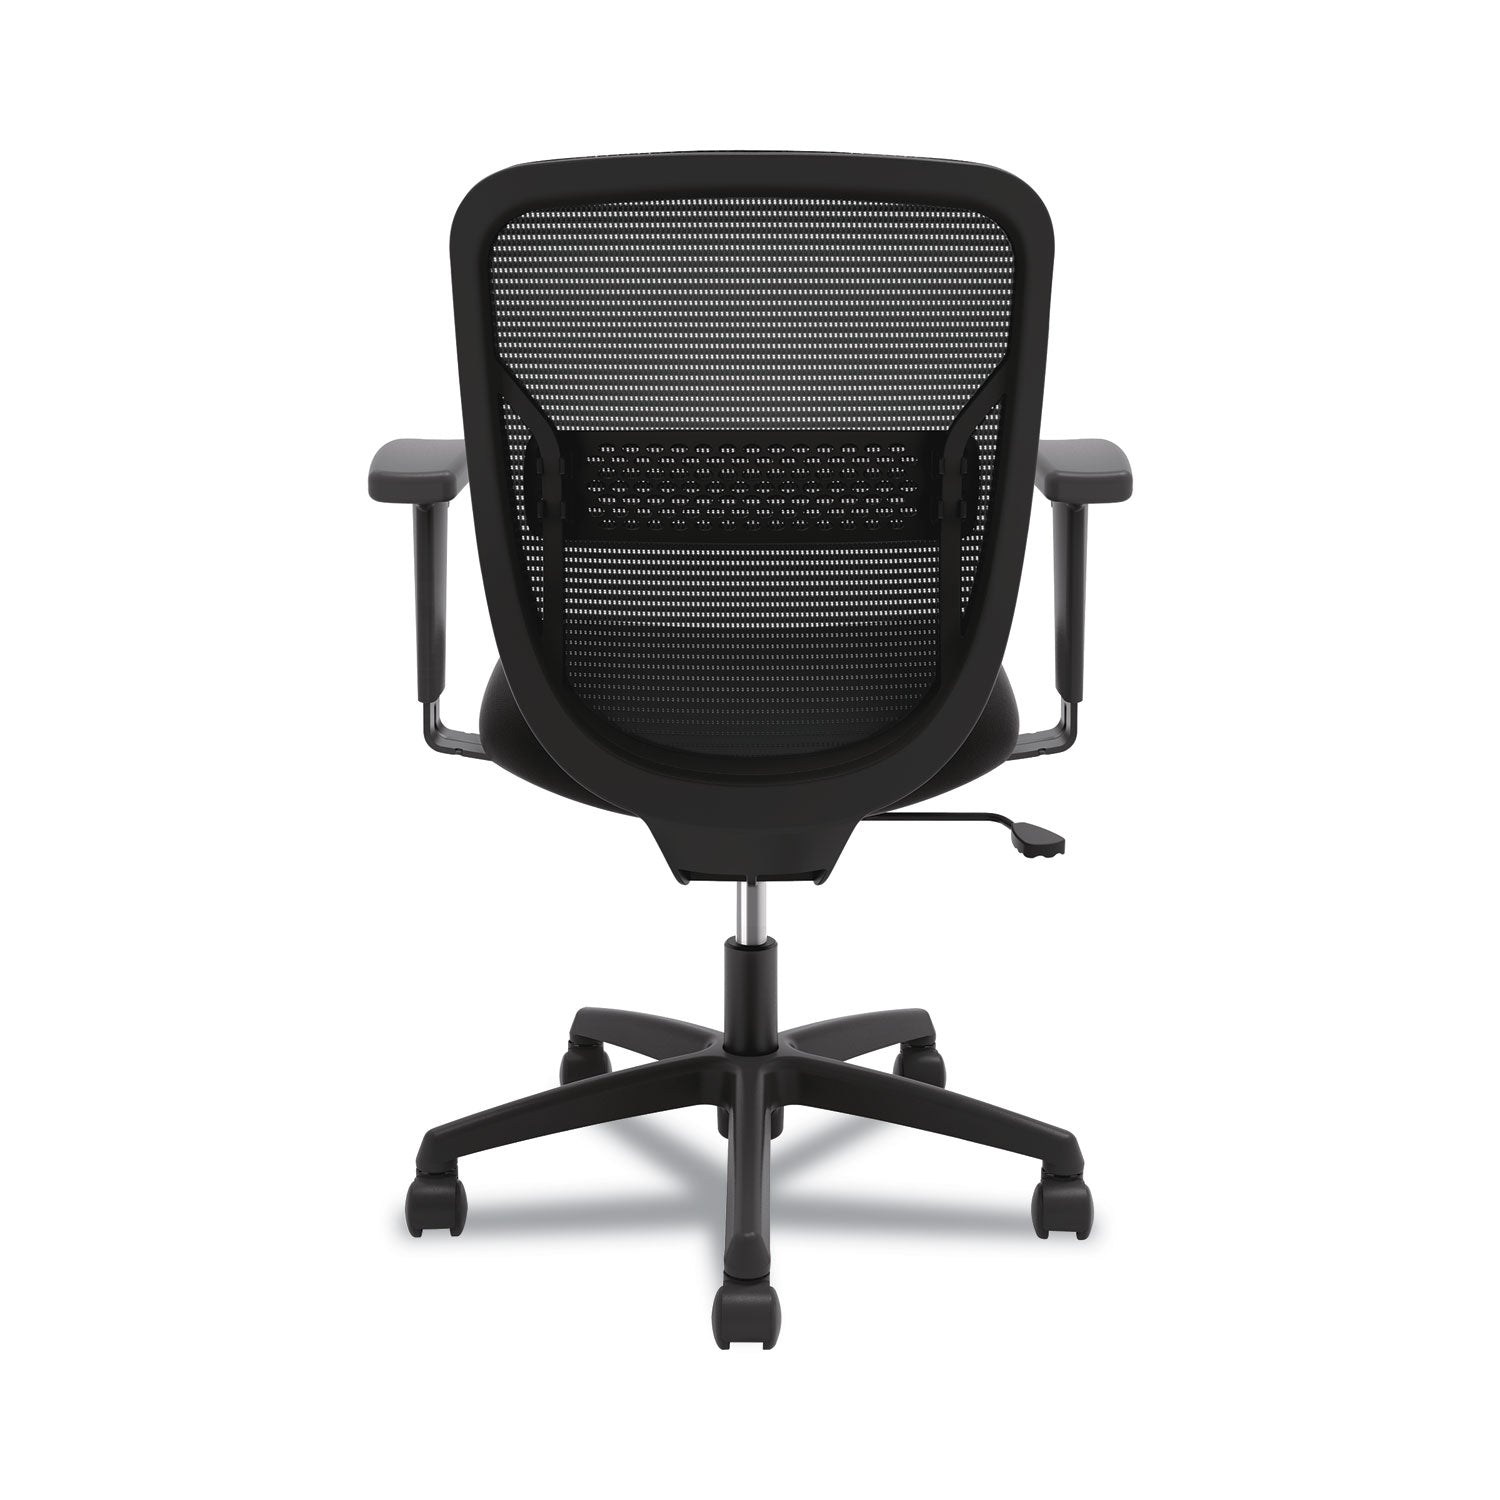 gateway-mid-back-task-chair-supports-up-to-250-lb-17-to-22-seat-height-black_hongvfmz1accf10 - 5